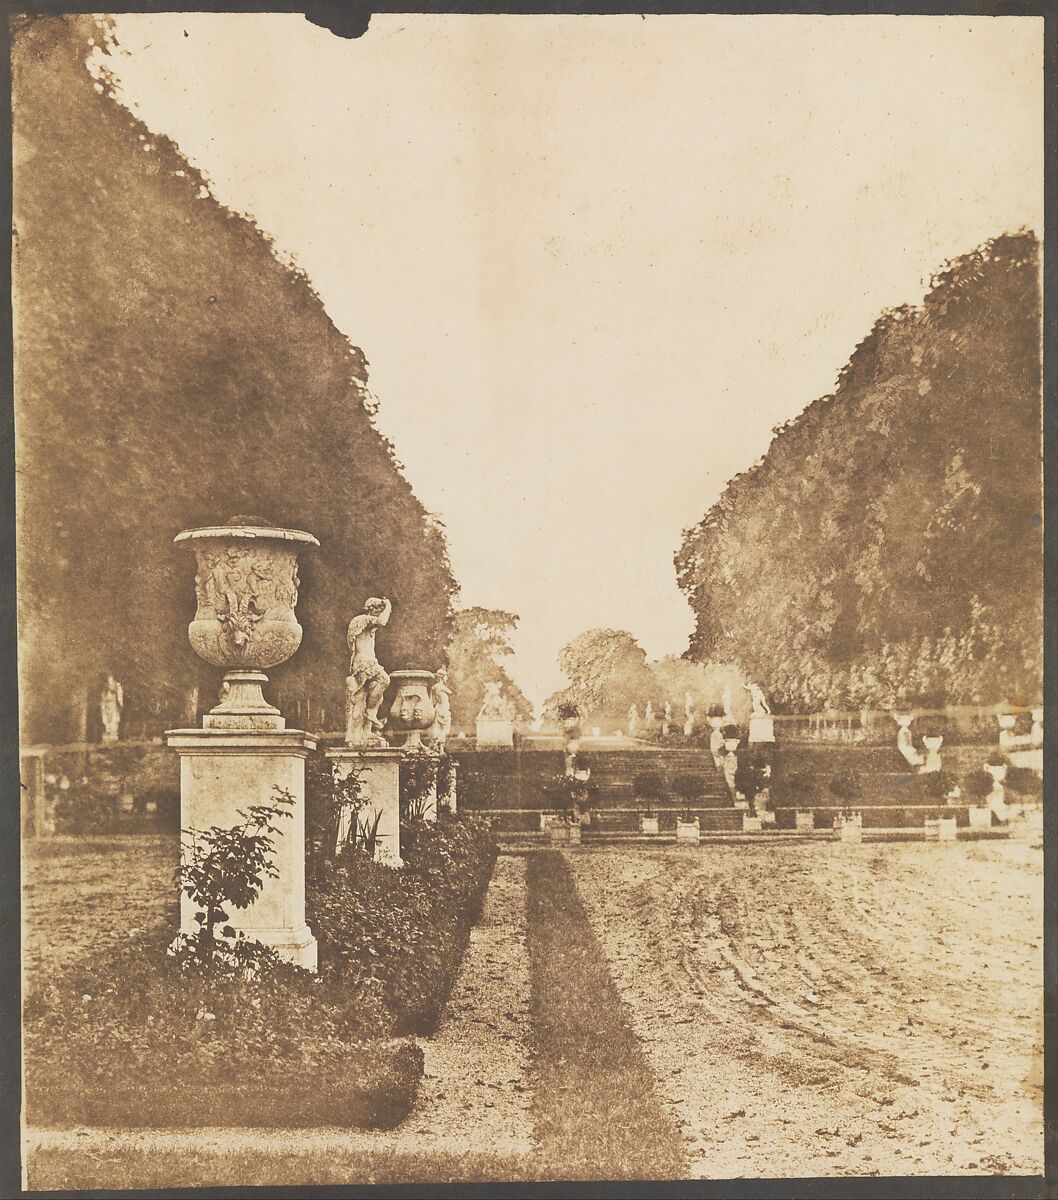 [Gardens of Saint-Cloud], Henri Victor Regnault (French, 1810–1878), Salted paper print from paper negative 